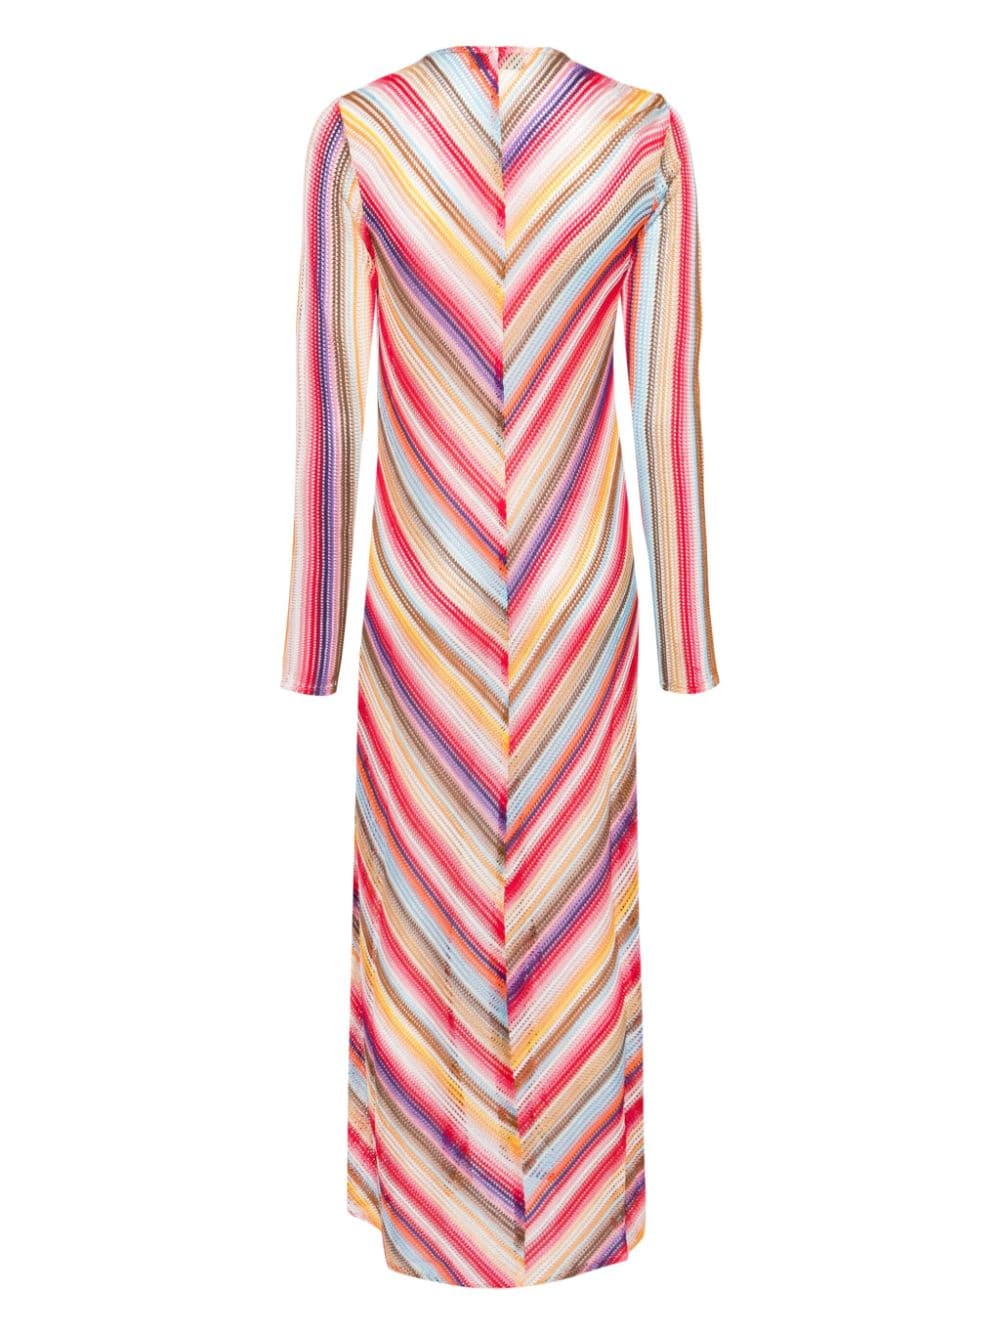 MISSONI Multicolored Striped V-Neck Cover-up with Front Tie